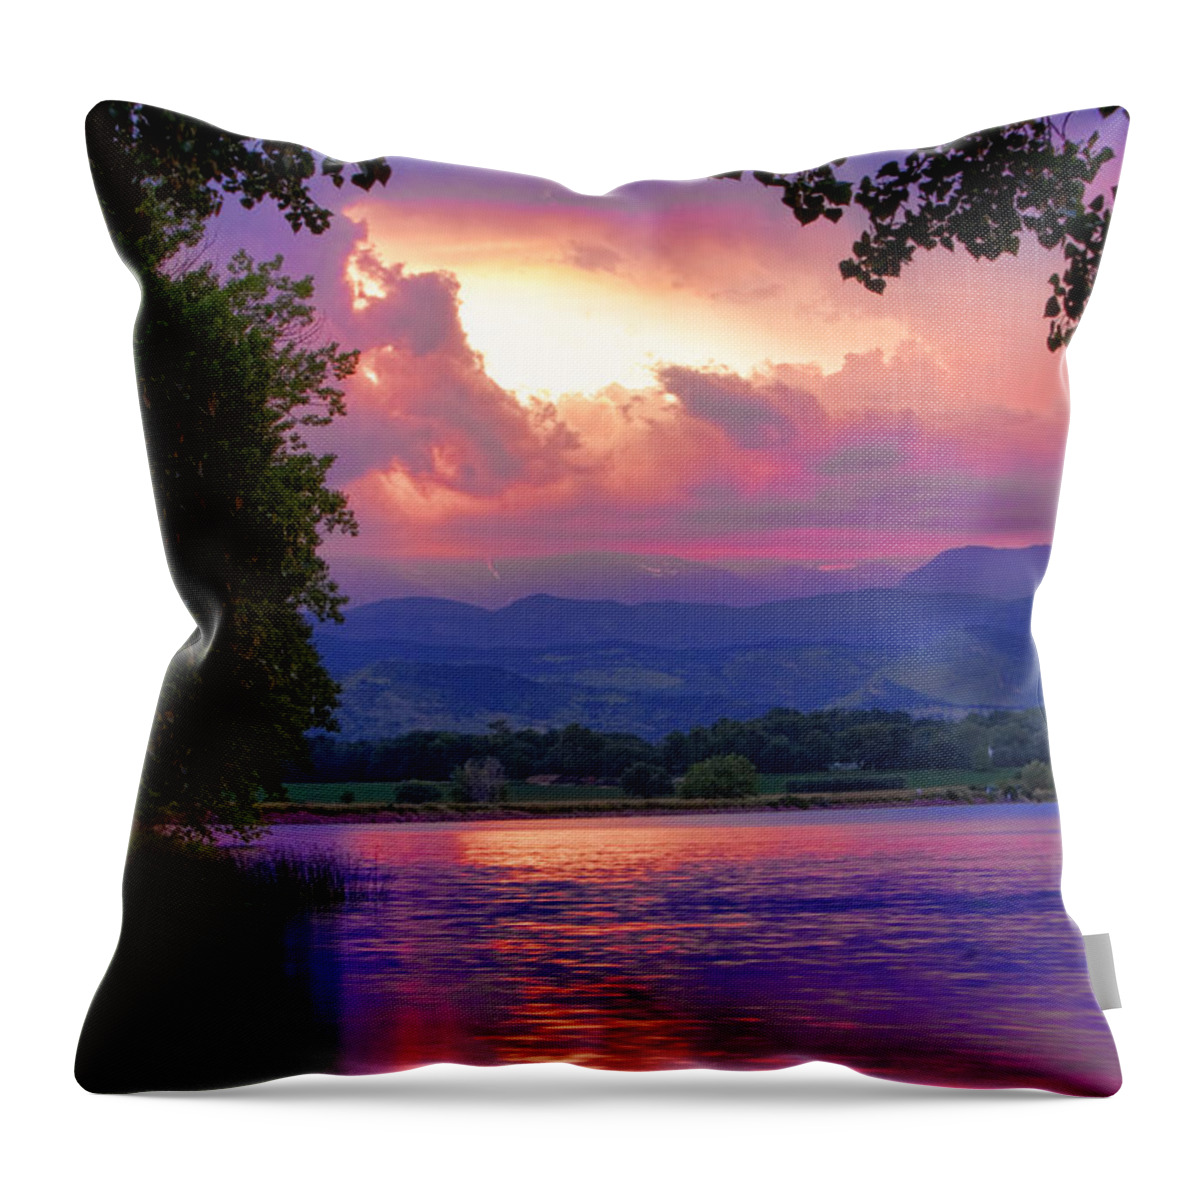 Sunsets Throw Pillow featuring the photograph McIntosh Lake Sunset by James BO Insogna